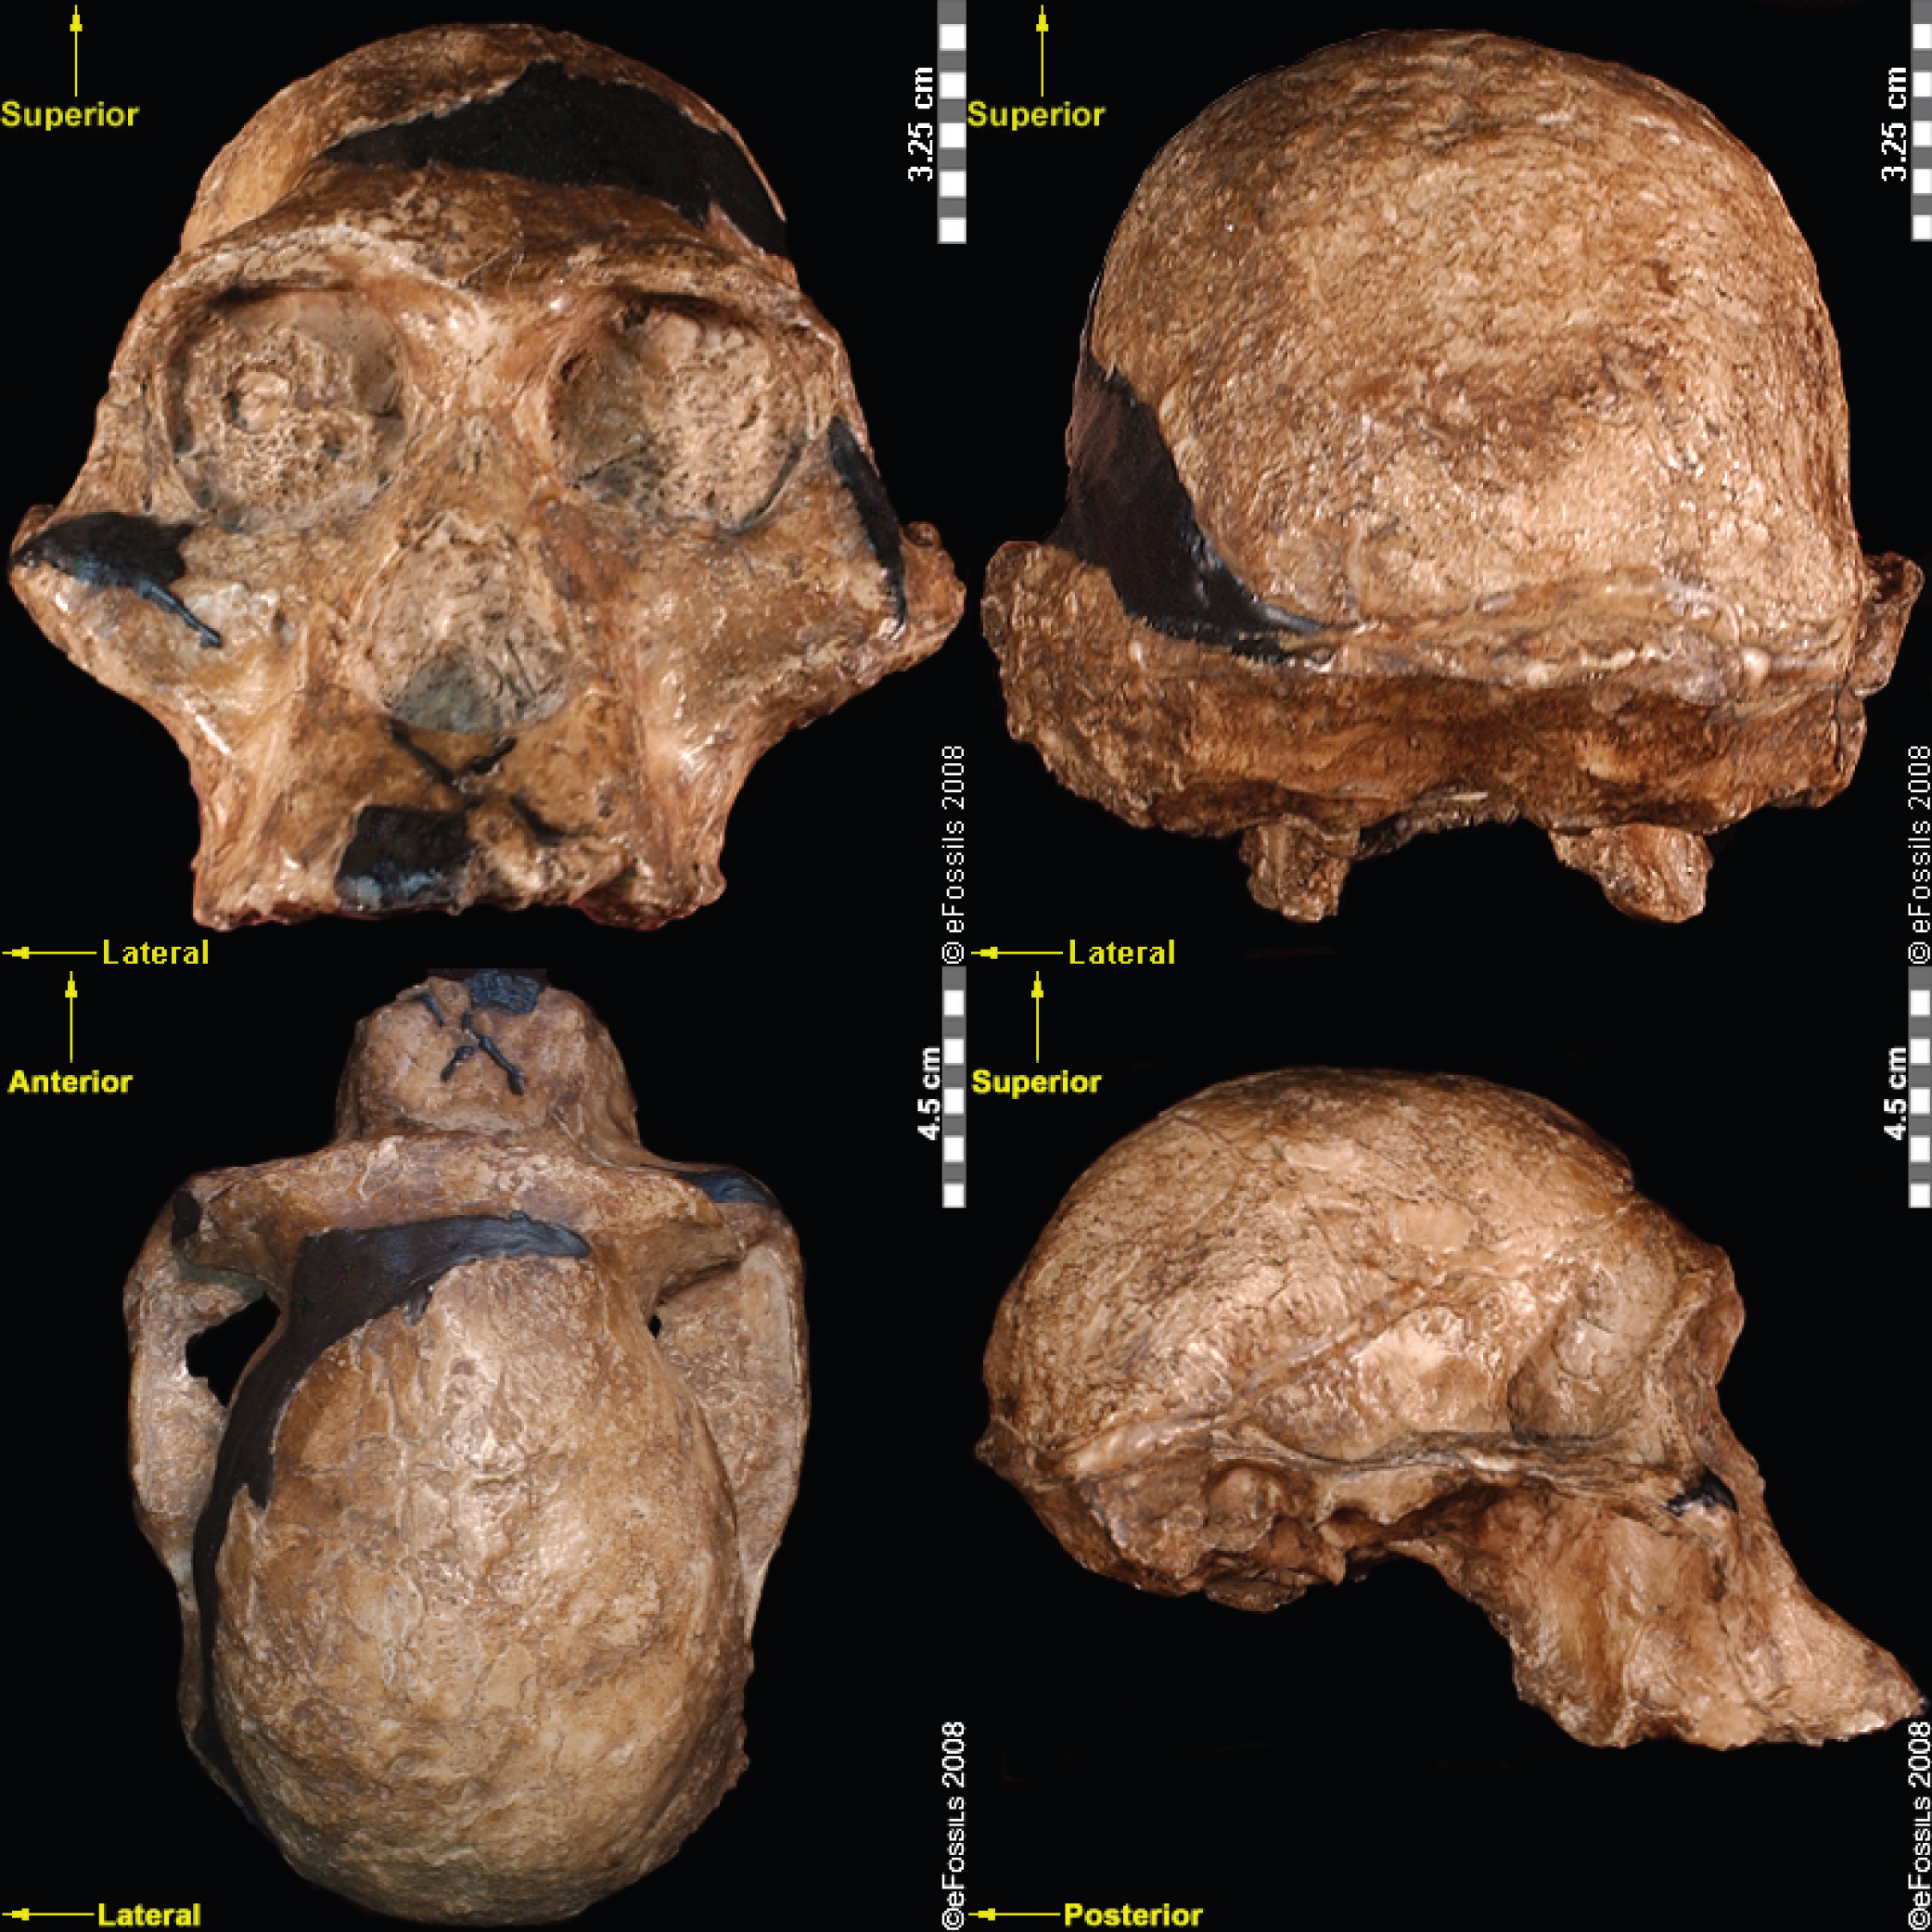 Four views of an ancient skull are shown on a black background.